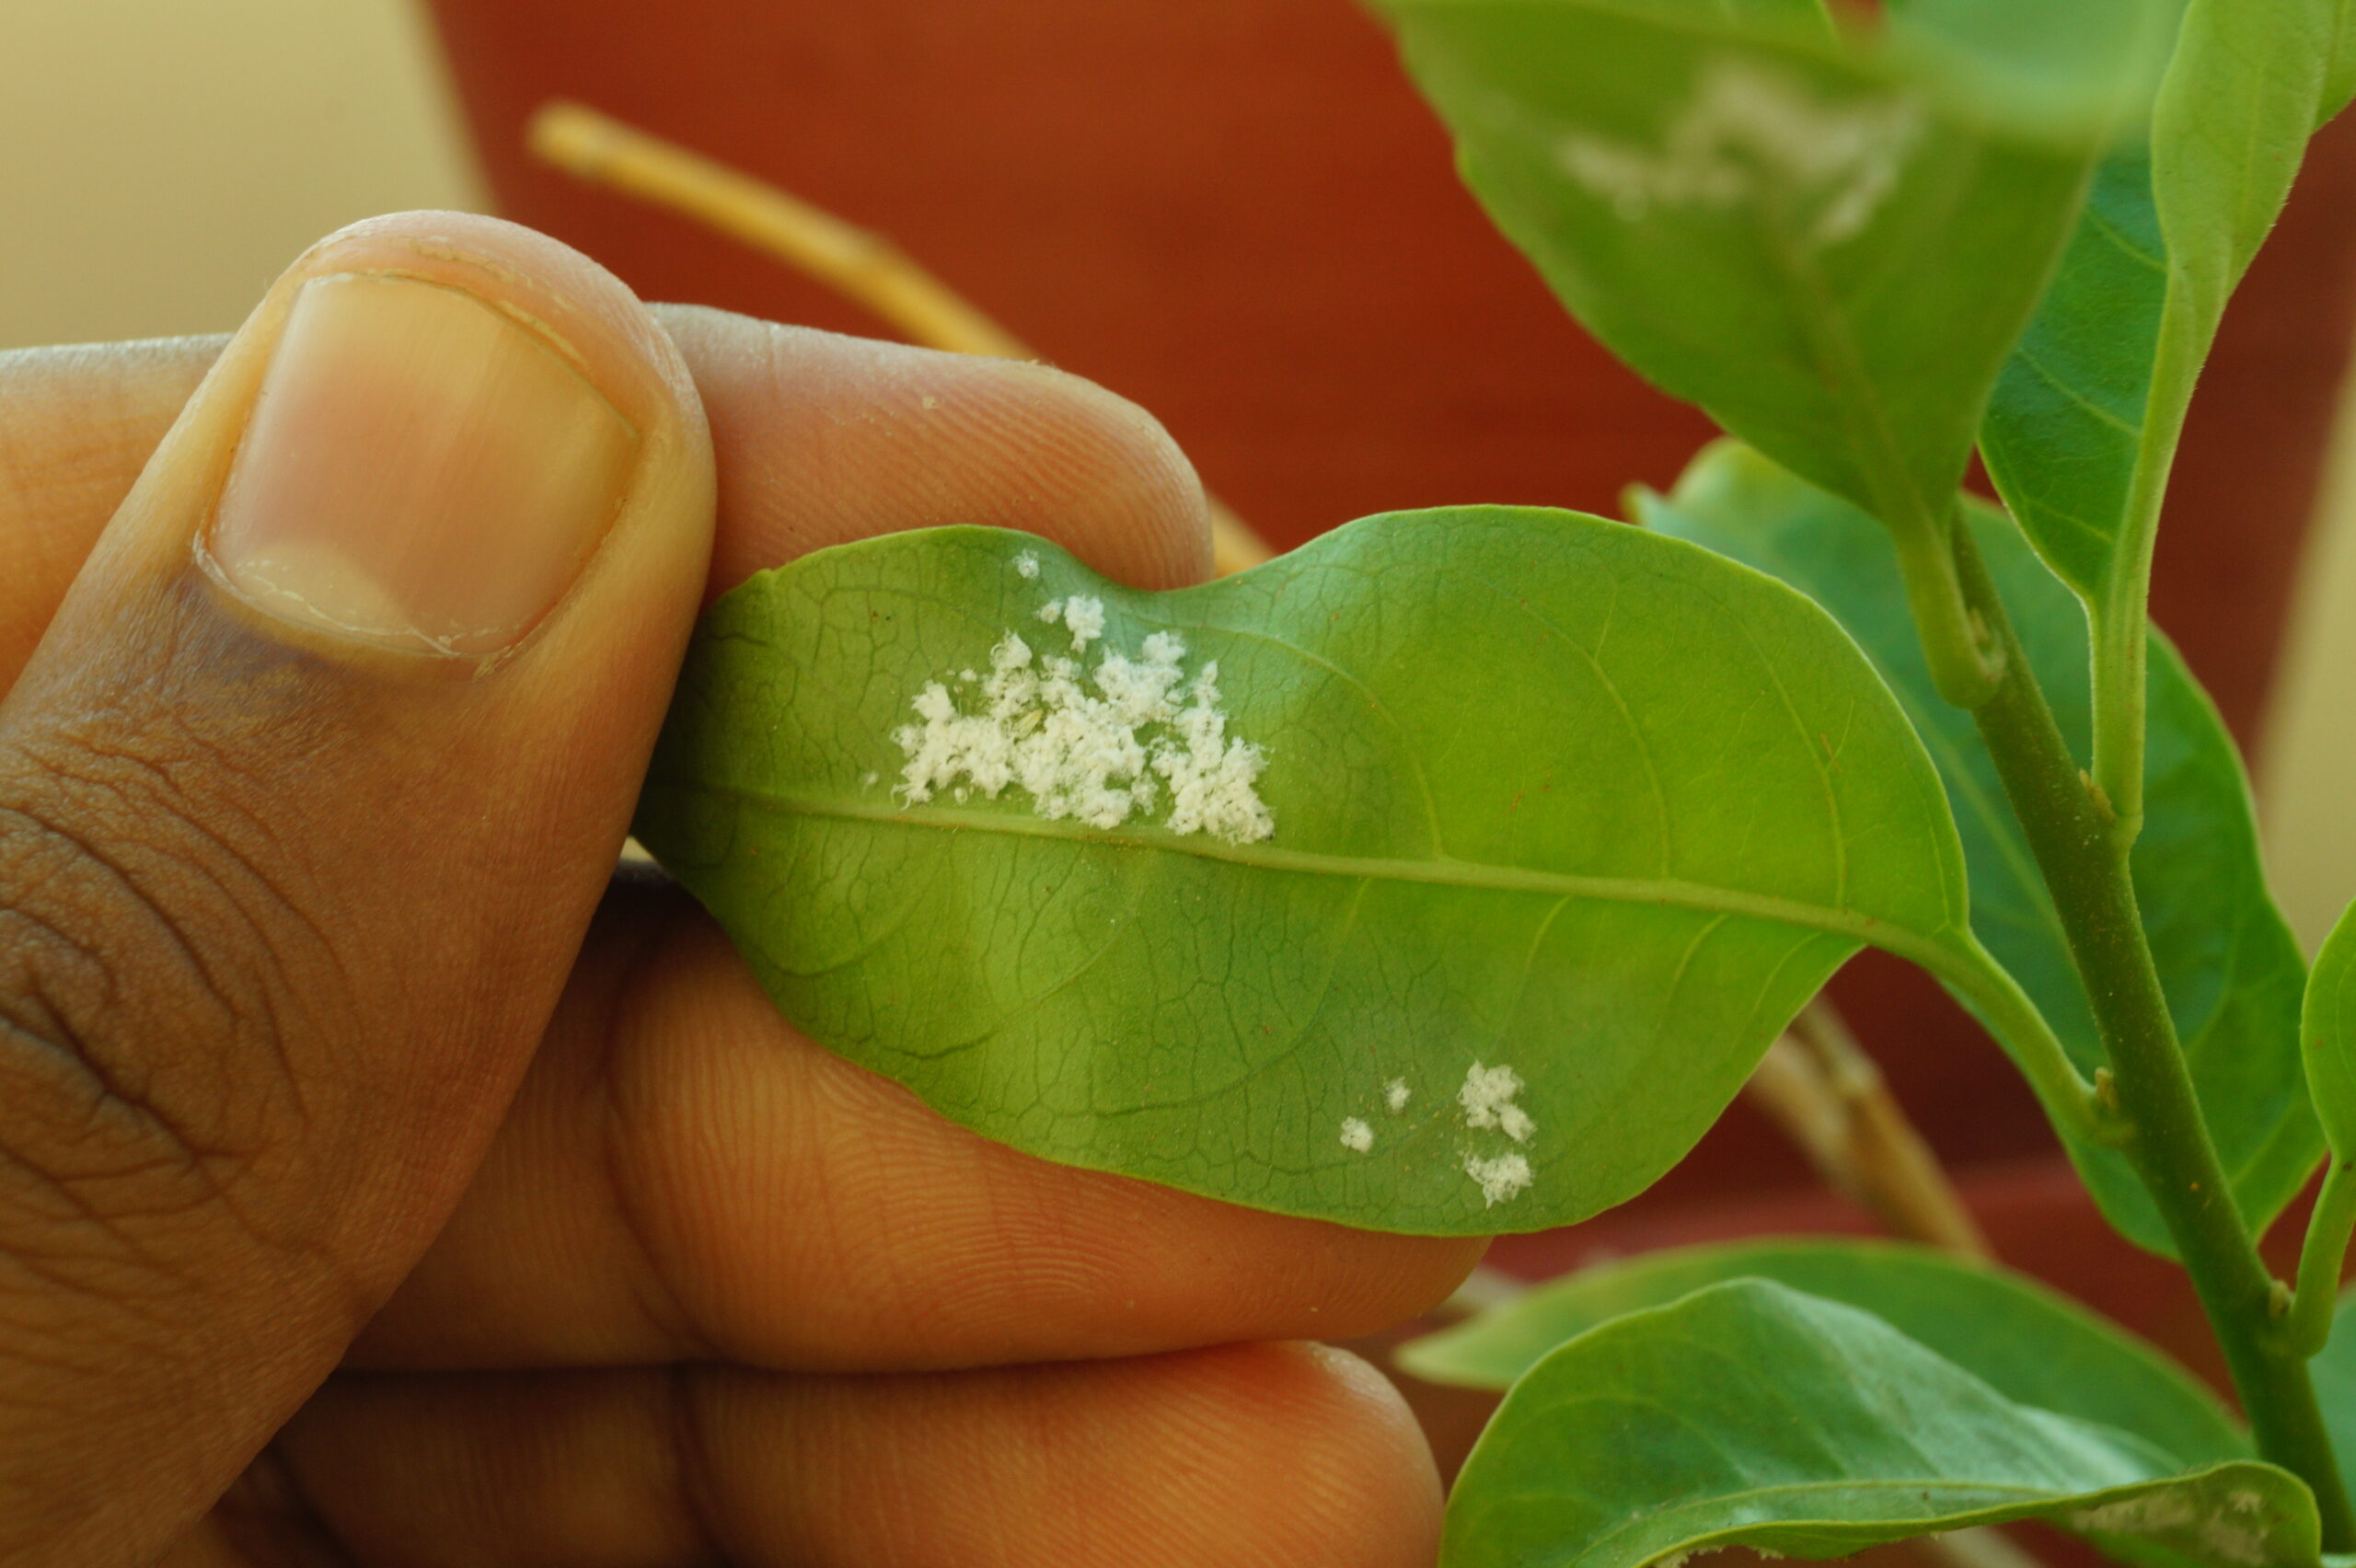 Woolly aphid: persistent pest by Mario Villarino